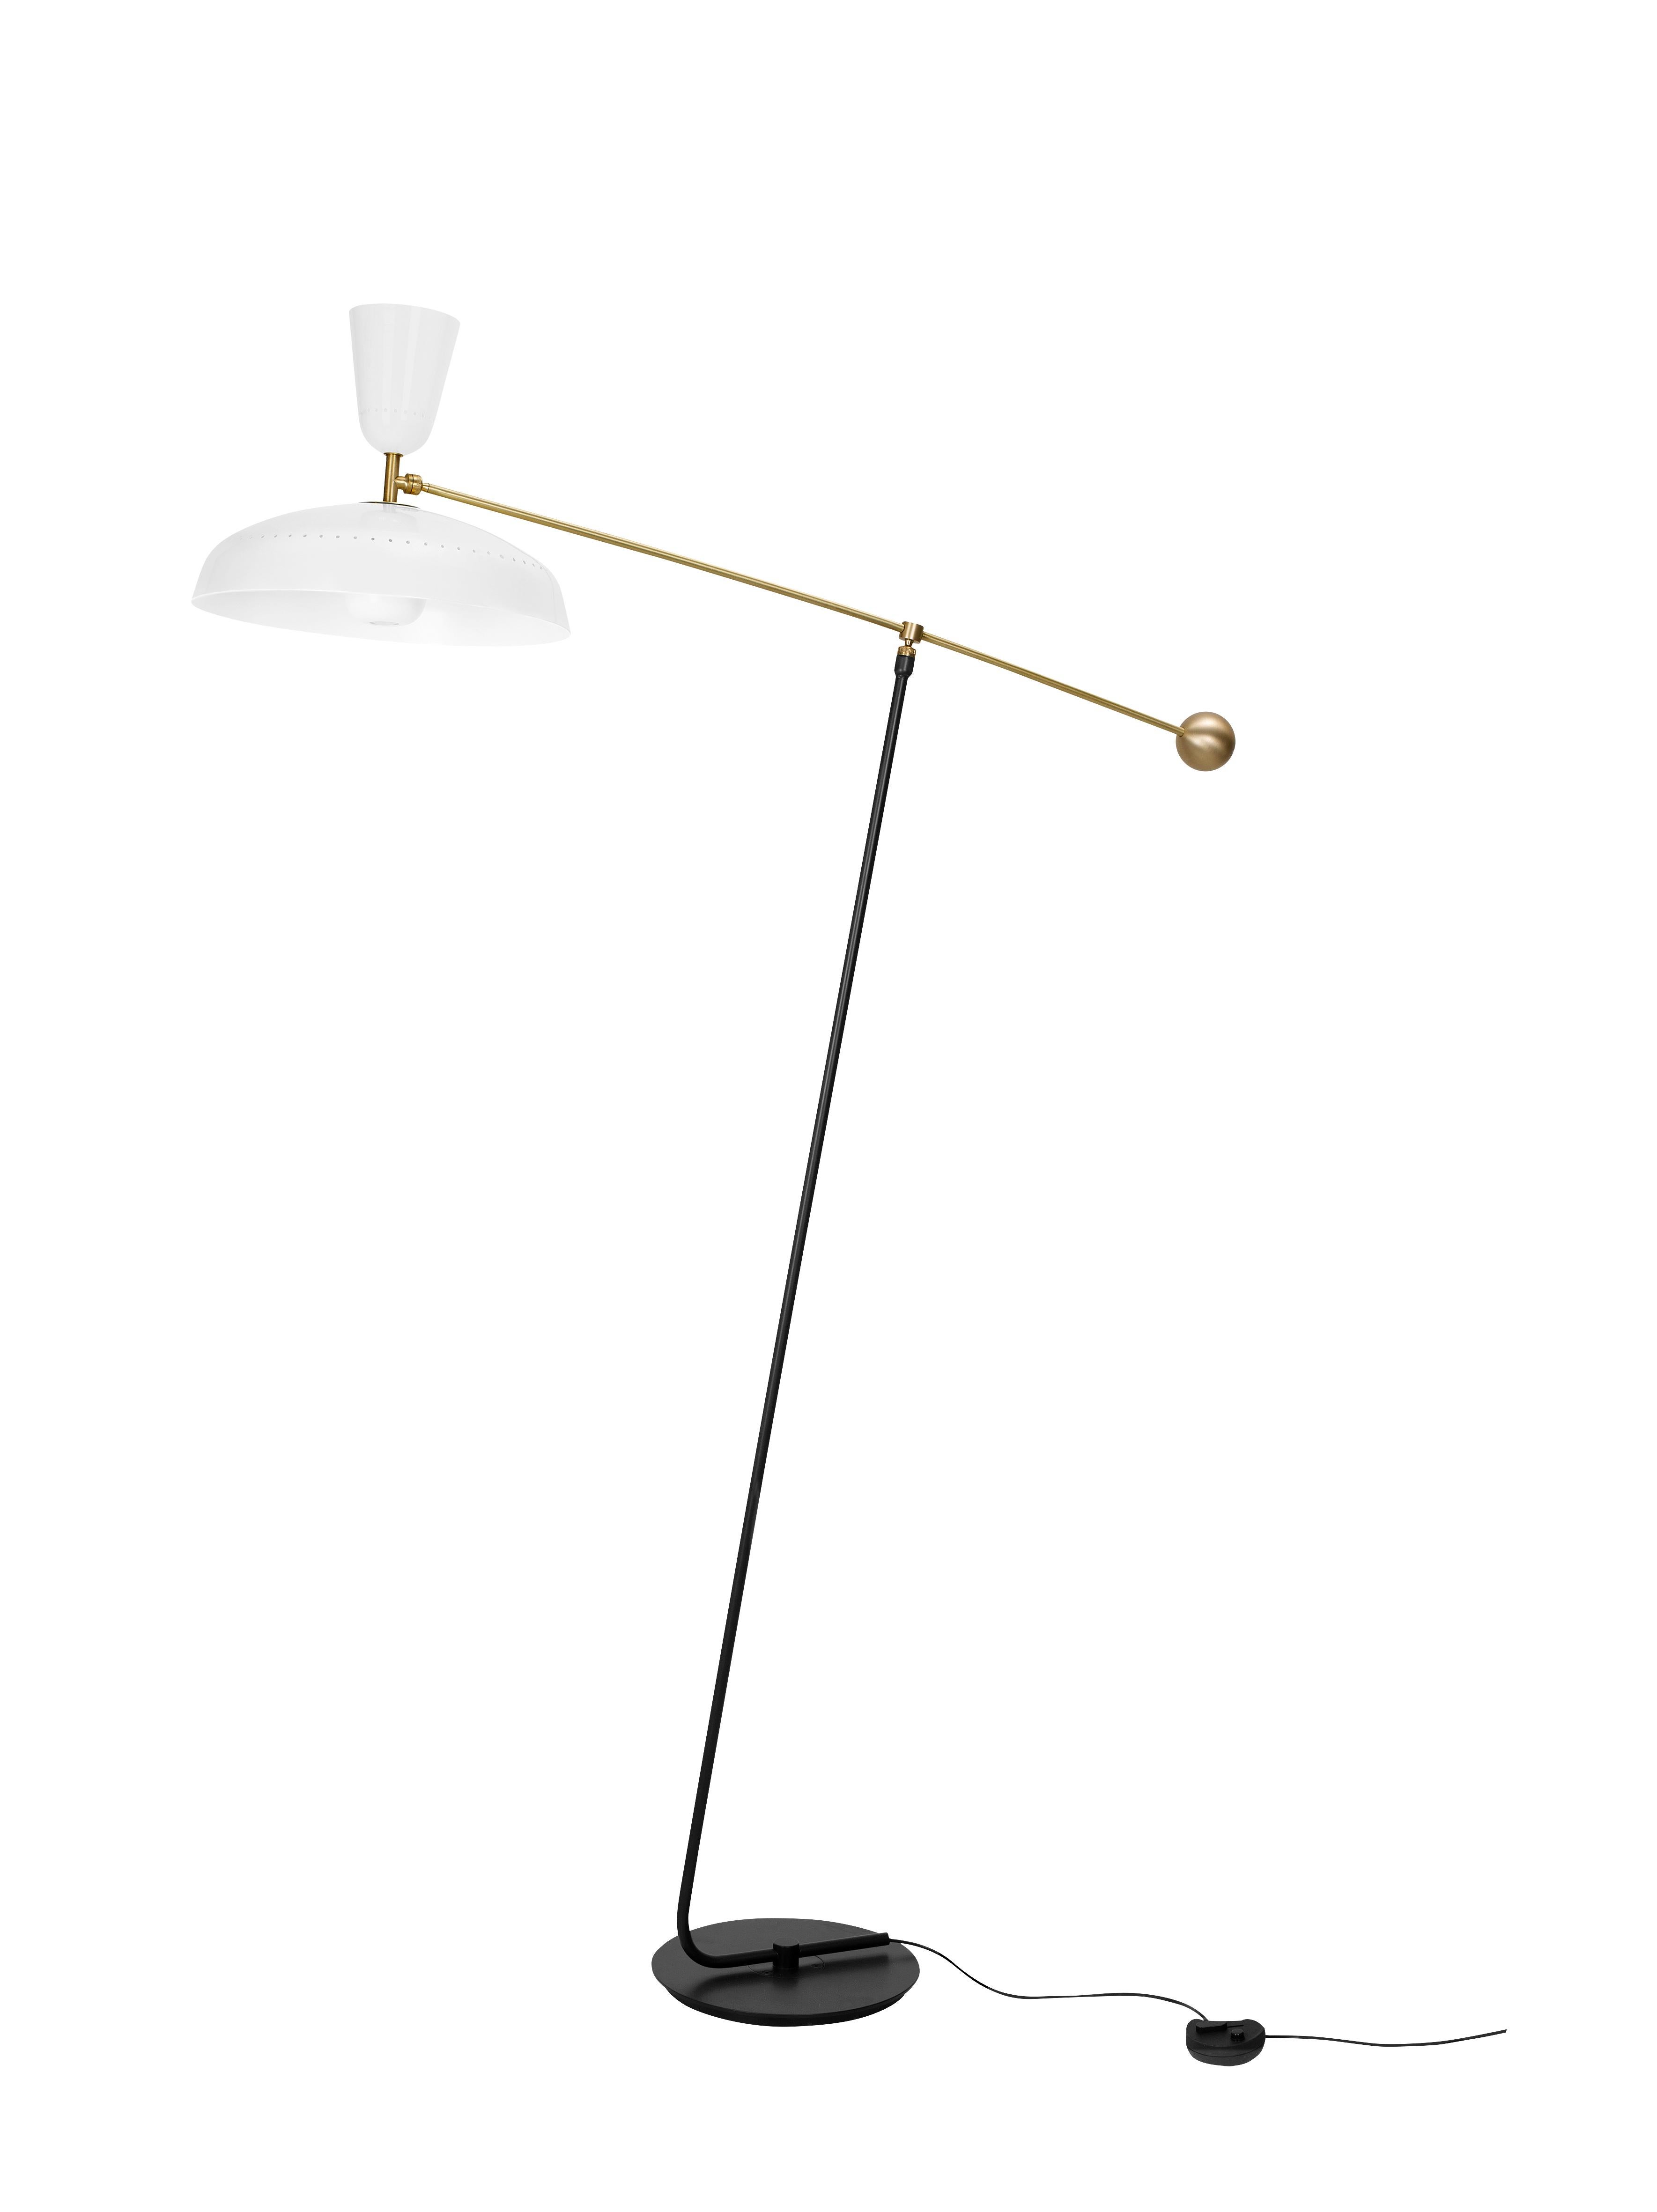 Large Pierre Guariche 'G1' Floor Lamp for Sammode Studio in Black For Sale 7